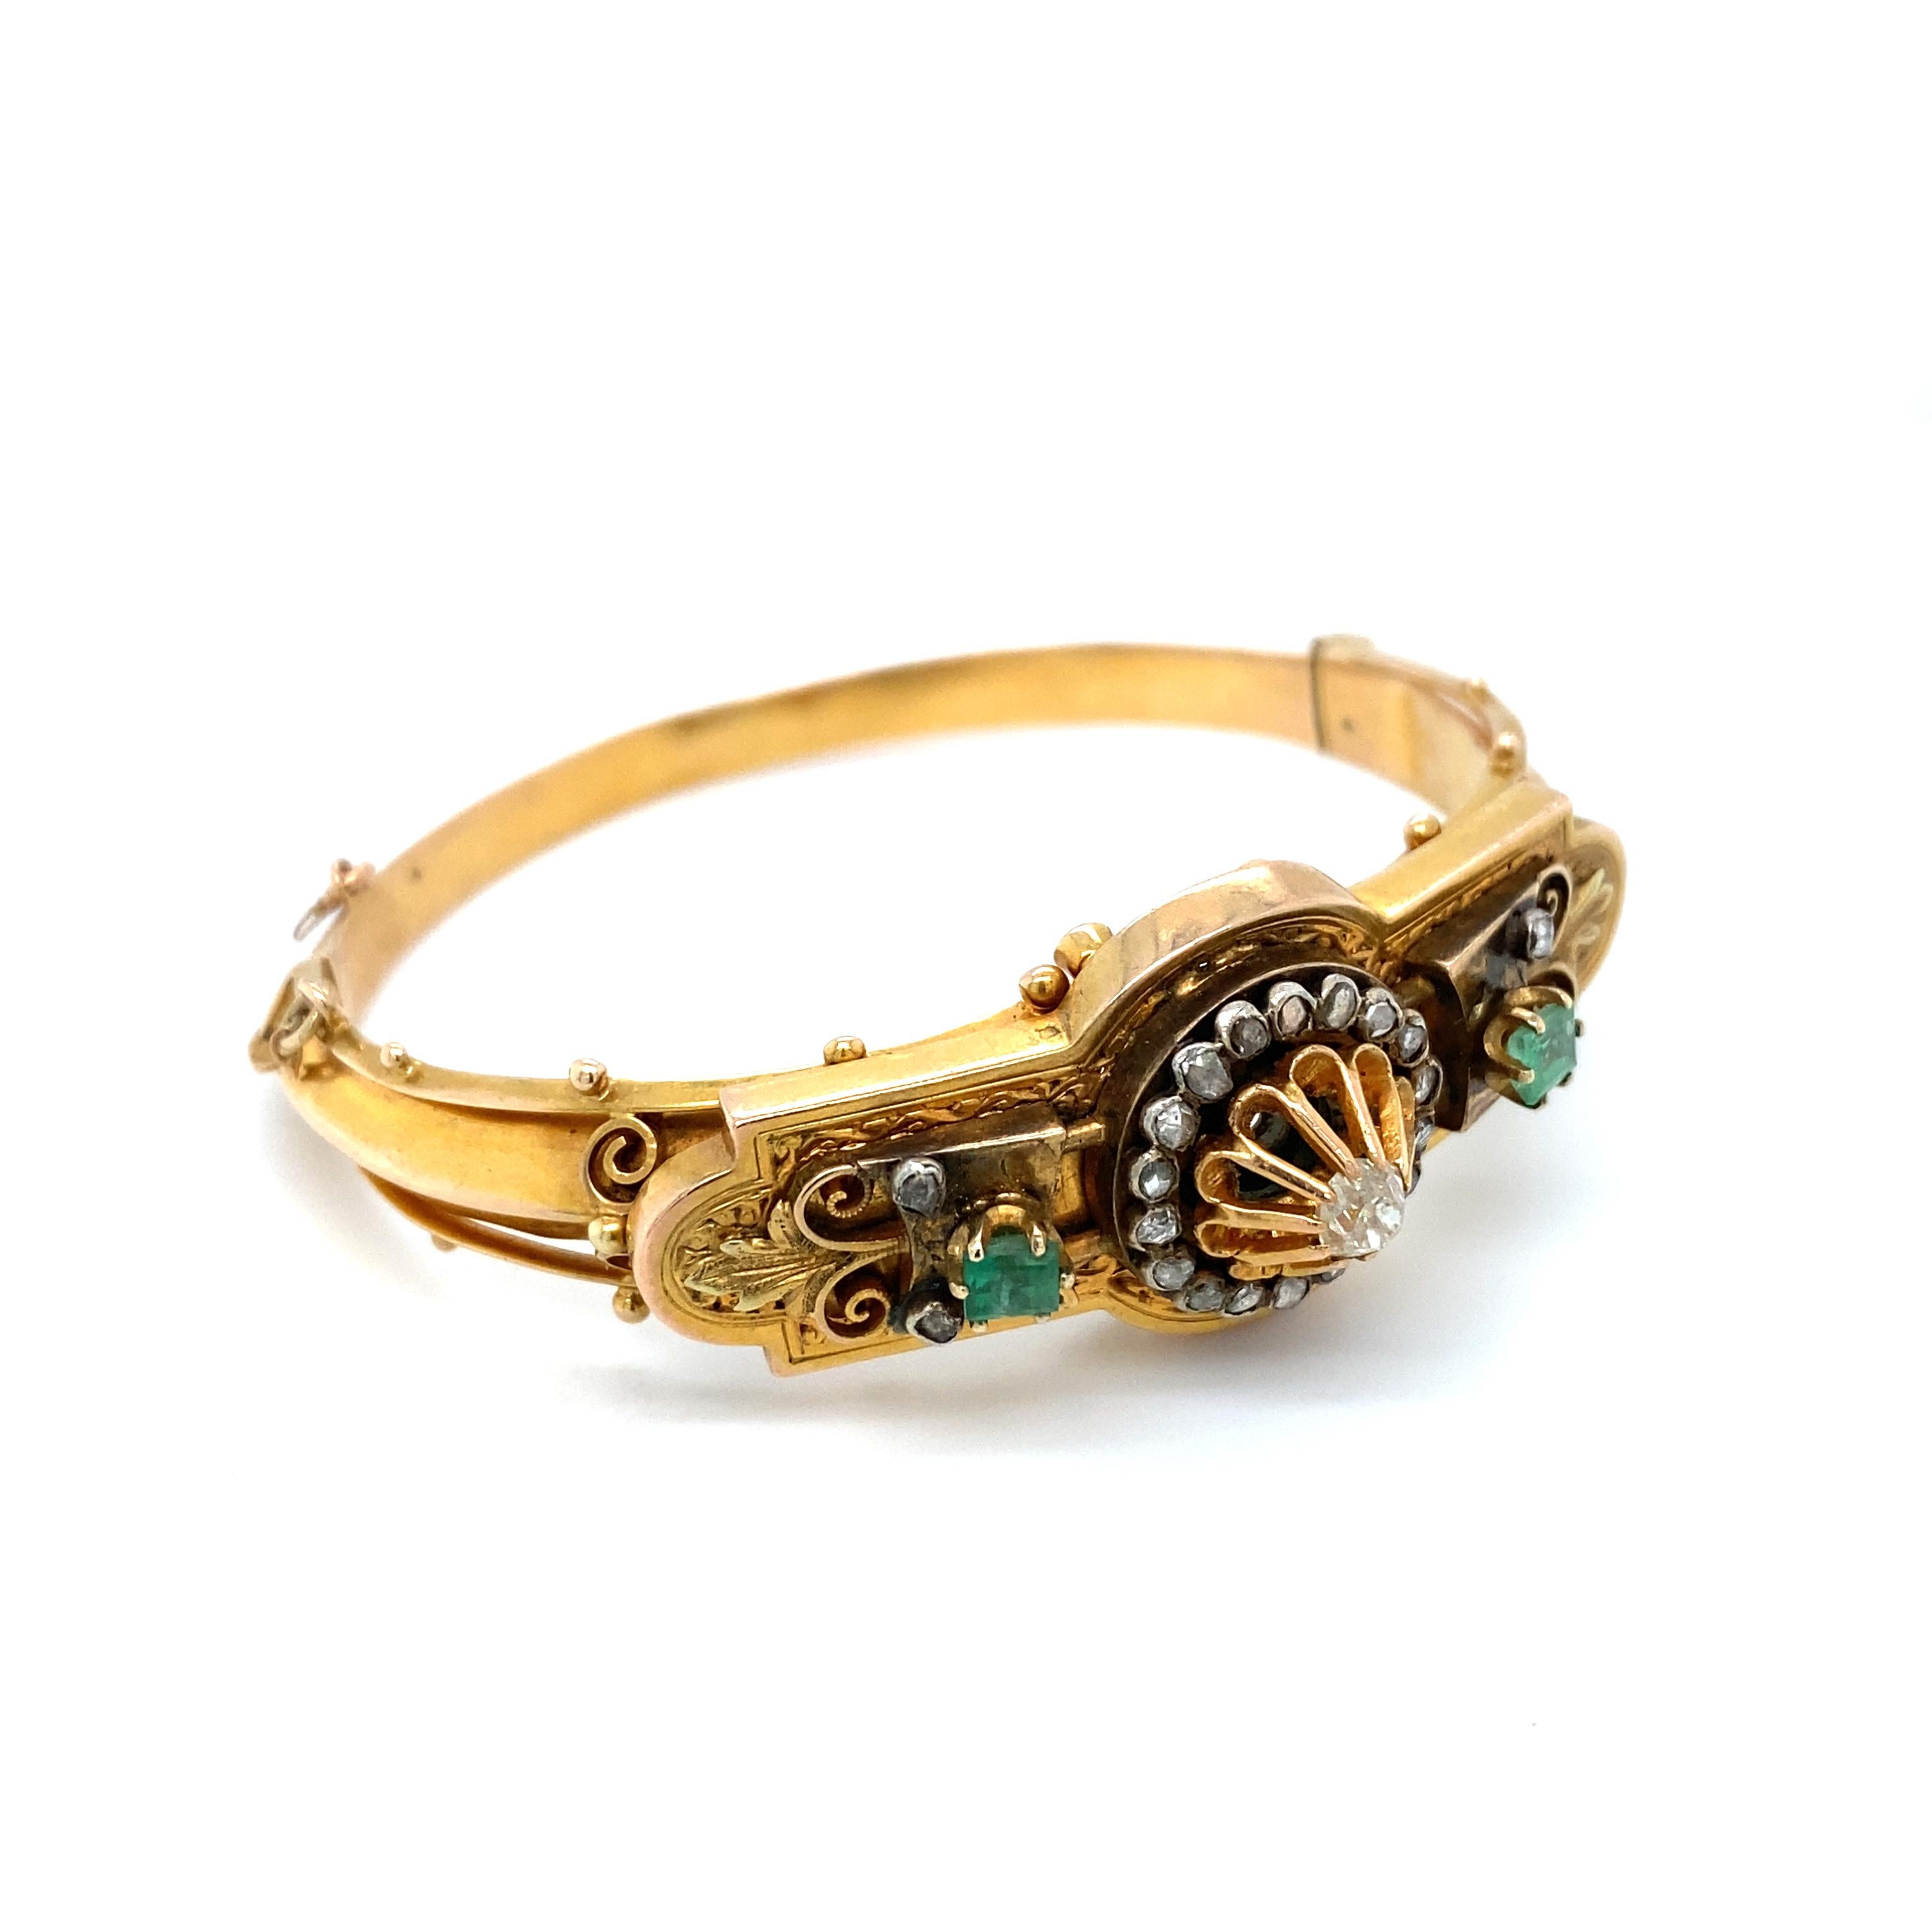 Item Details: This Victorian era hinged bangle bracelet is a high-quality piece that is over 140 years old. With its brilliant diamonds and emeralds and intricate detailing, this bracelet is a hallmark of Victorian era design. It is a beautiful